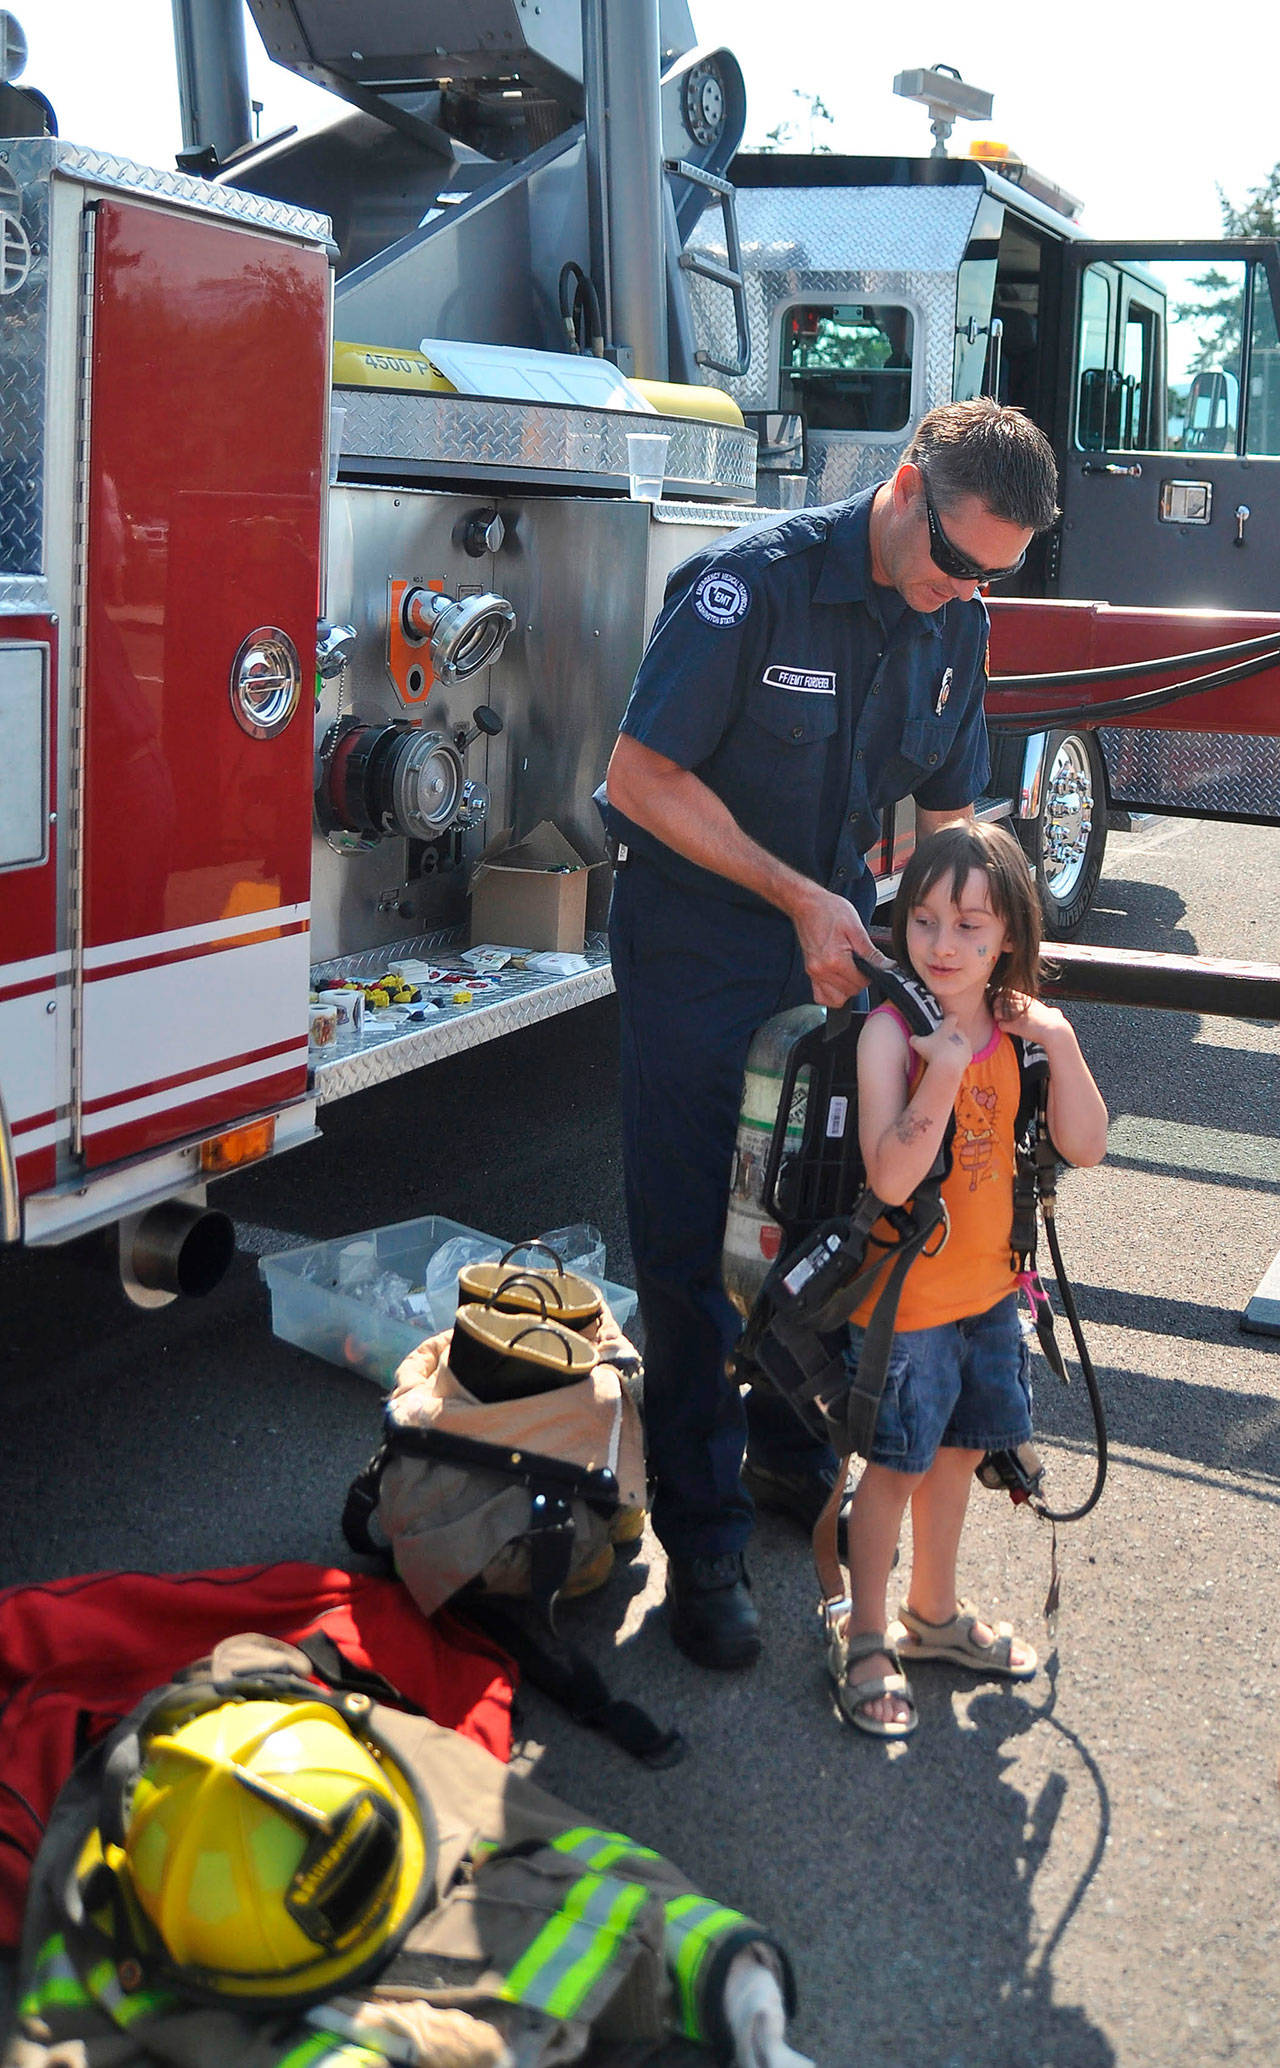 Clallam County Fire District No. 3 firefighter/EMT Lee Forderer, left, helps Lindsey Anderson, try on some firefighting equipment in 2014. (Mike Dashiell/Olympic Peninsula News Group)